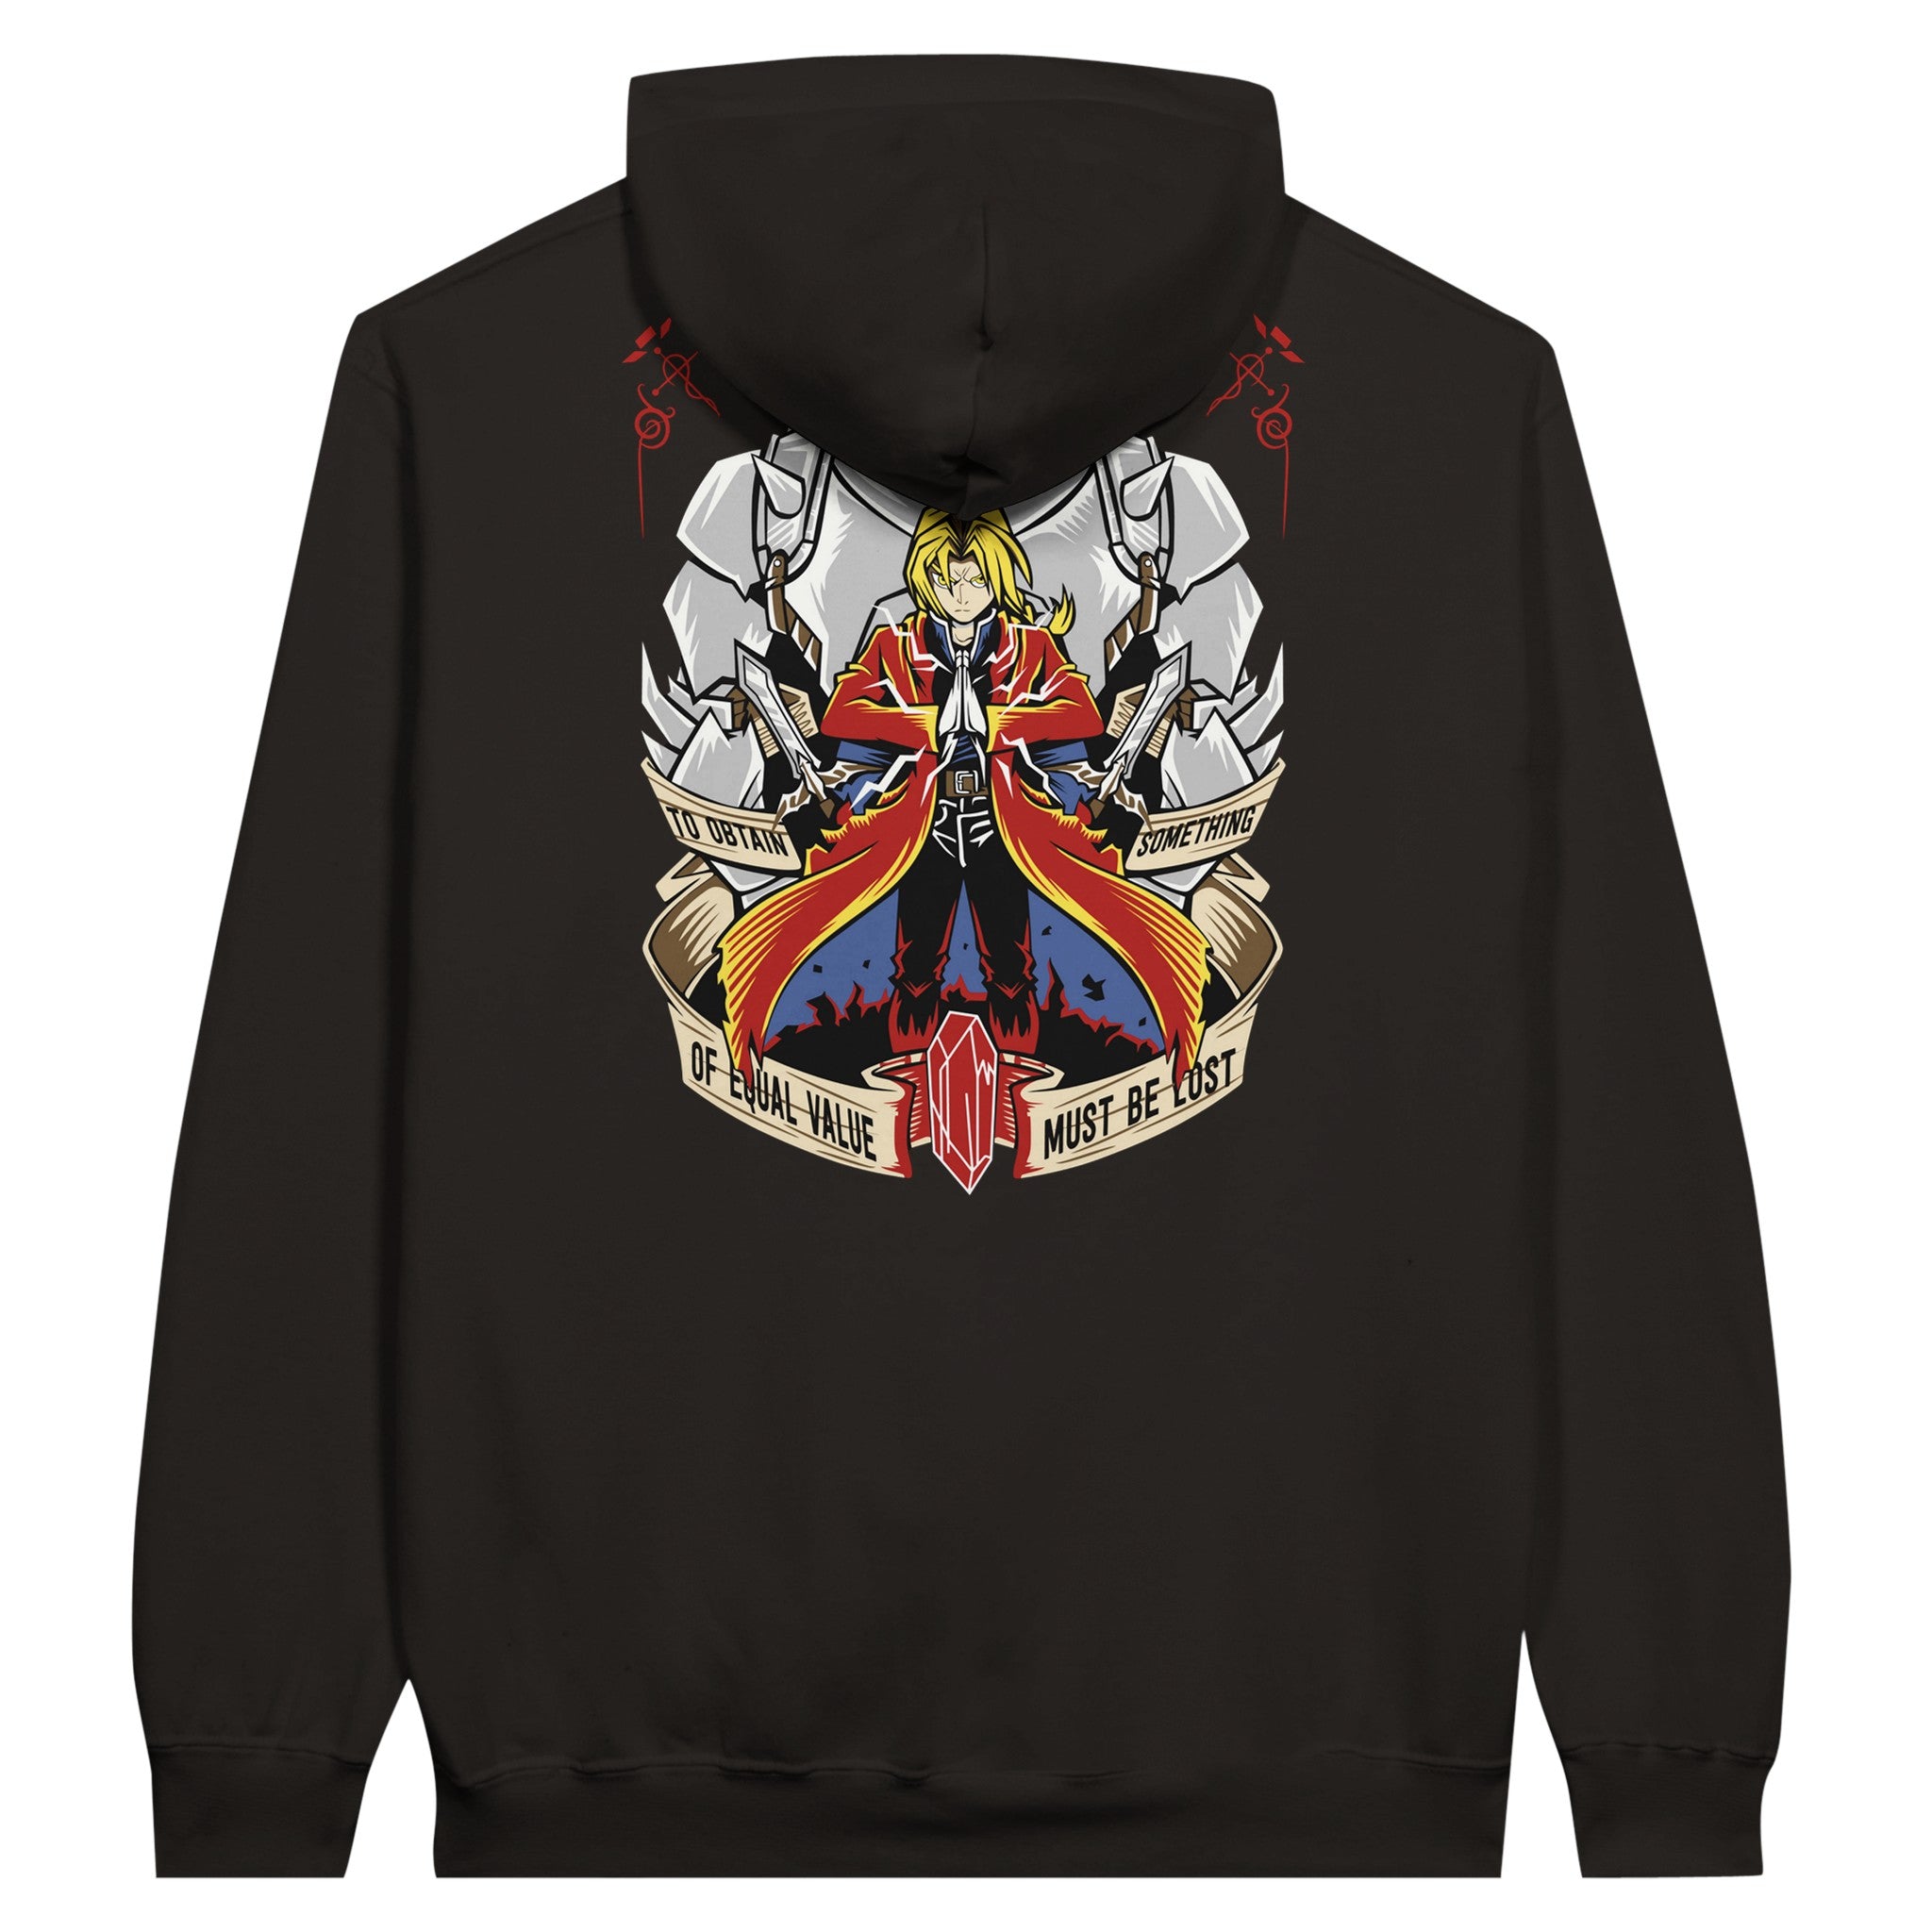 shop and buy fullmetal alchemist anime clothing edward elric and alponse hoodie